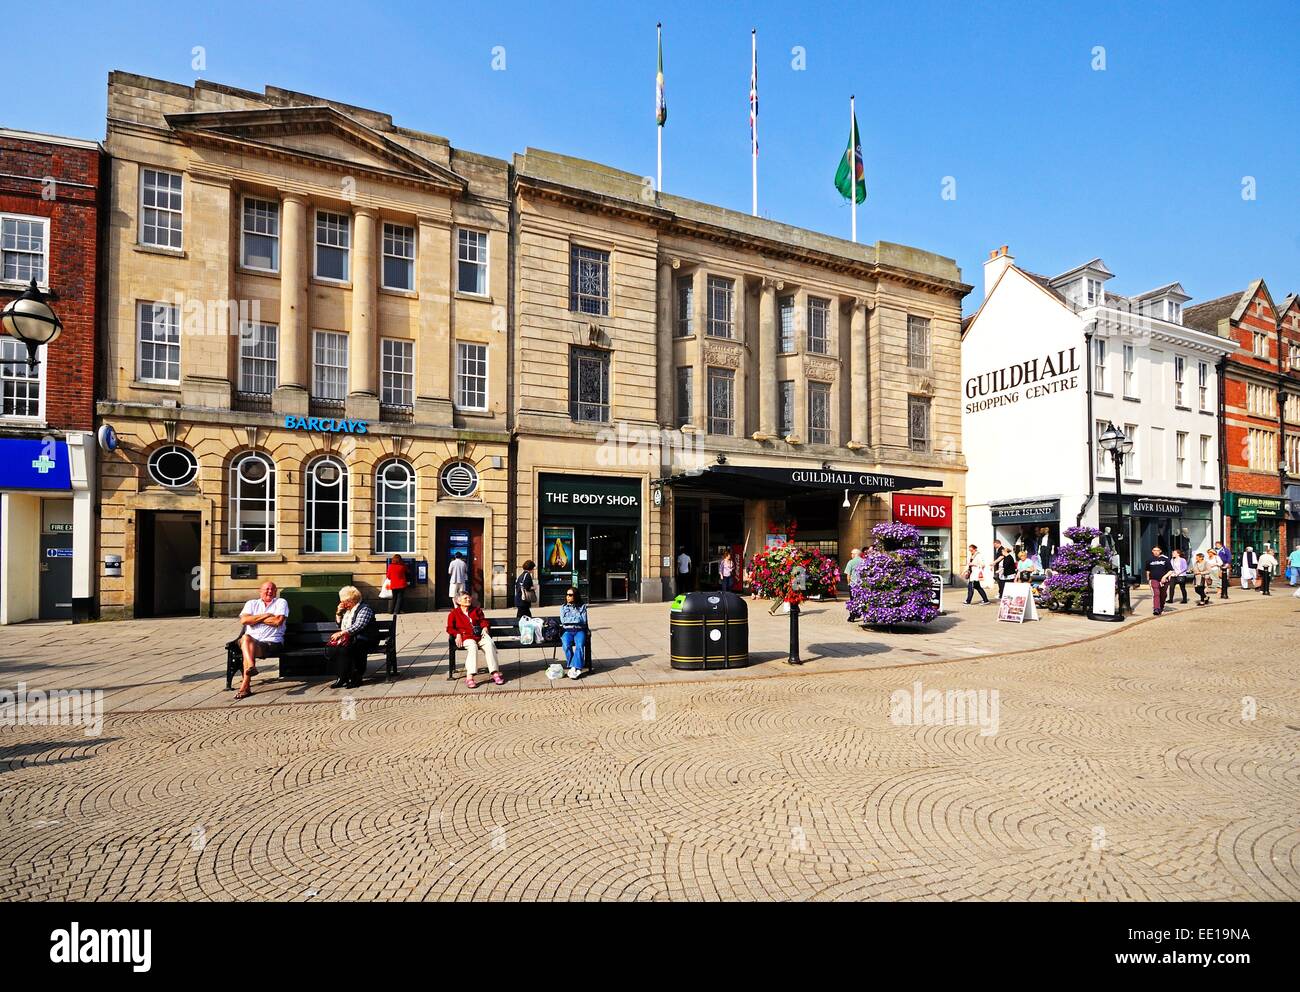 Barclays Bank and the Guildhall Centre in Market Square, Stafford, Staffordshire, England, UK, Western Europe. Stock Photo